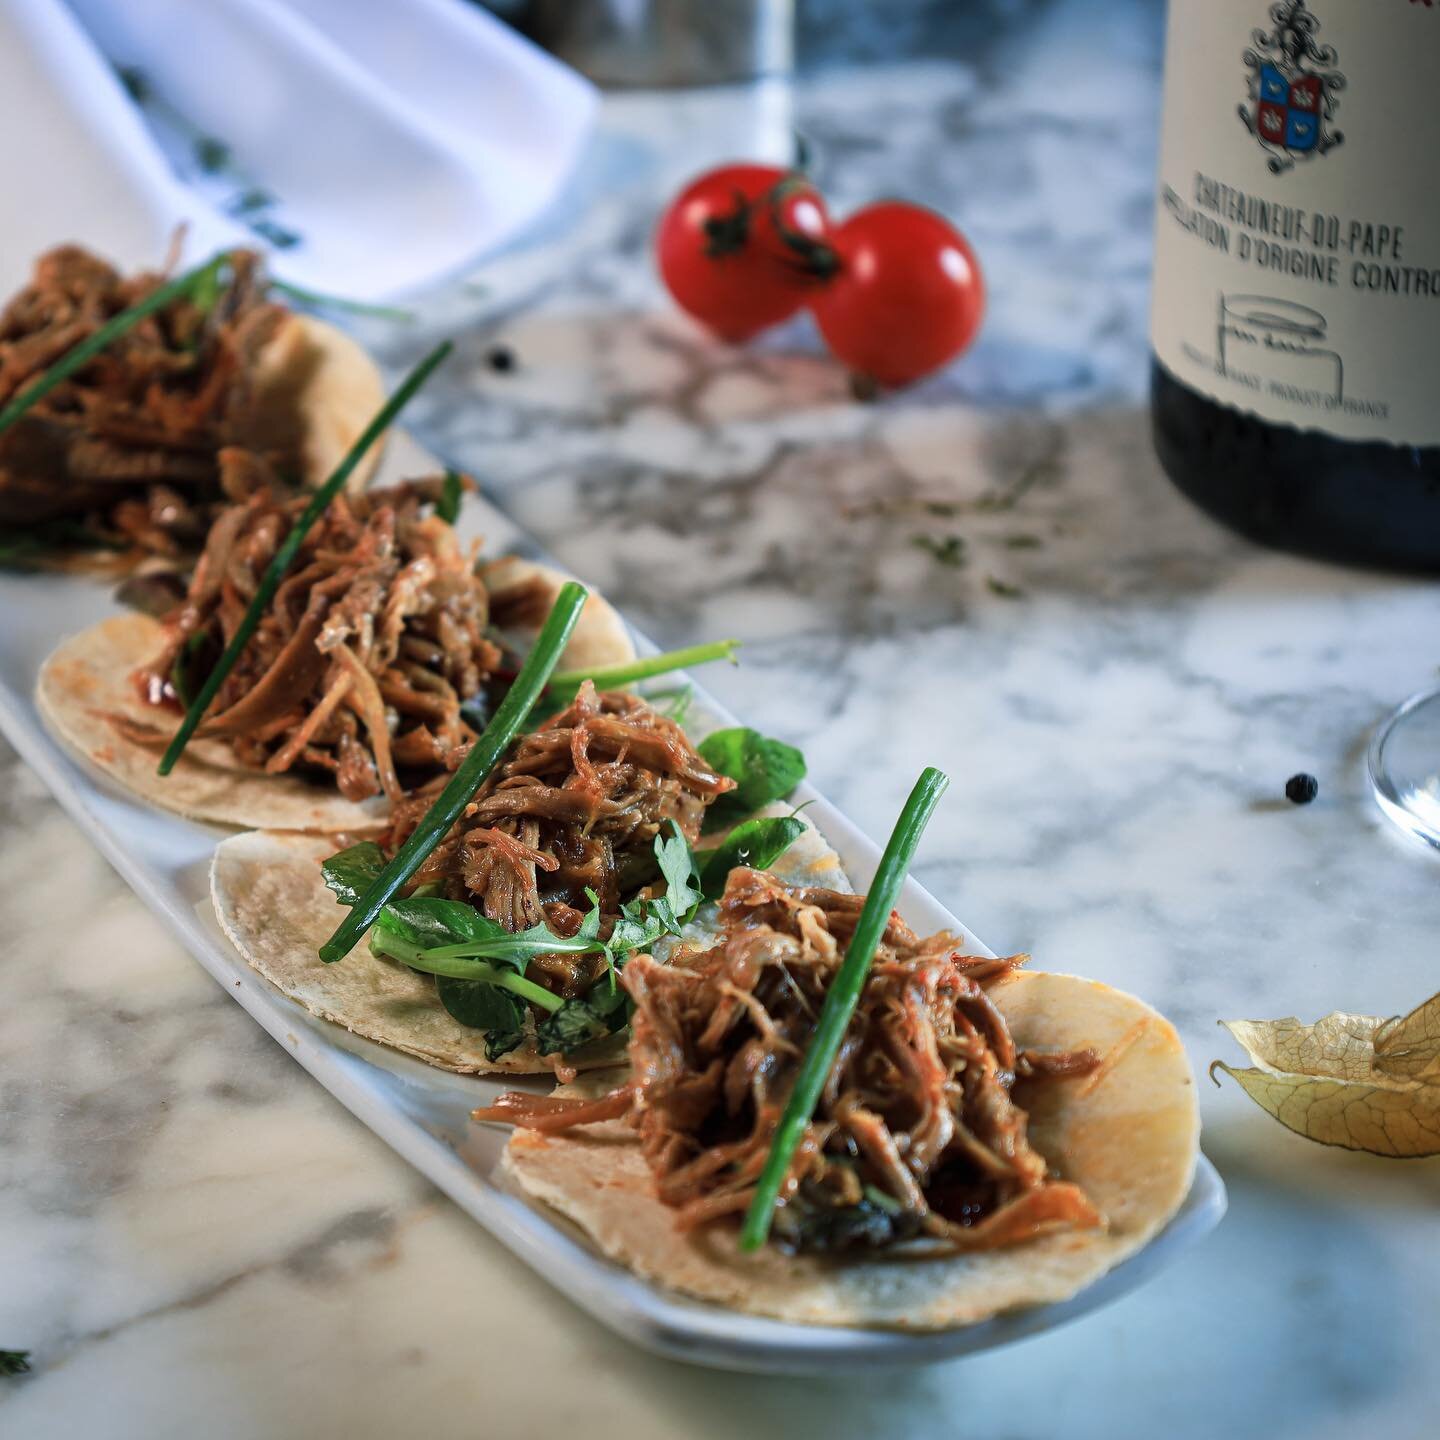 Looking for a delicious starter? Try the best Shredded Lamb Tacos in town 👉🏻 Exceptionally tasty slow cooked shreds of lamb place within four mini tortillas, accompanied with baby gem lettuce and dressed with BBQ sauce. 😋😋

#food #cocktails #taco